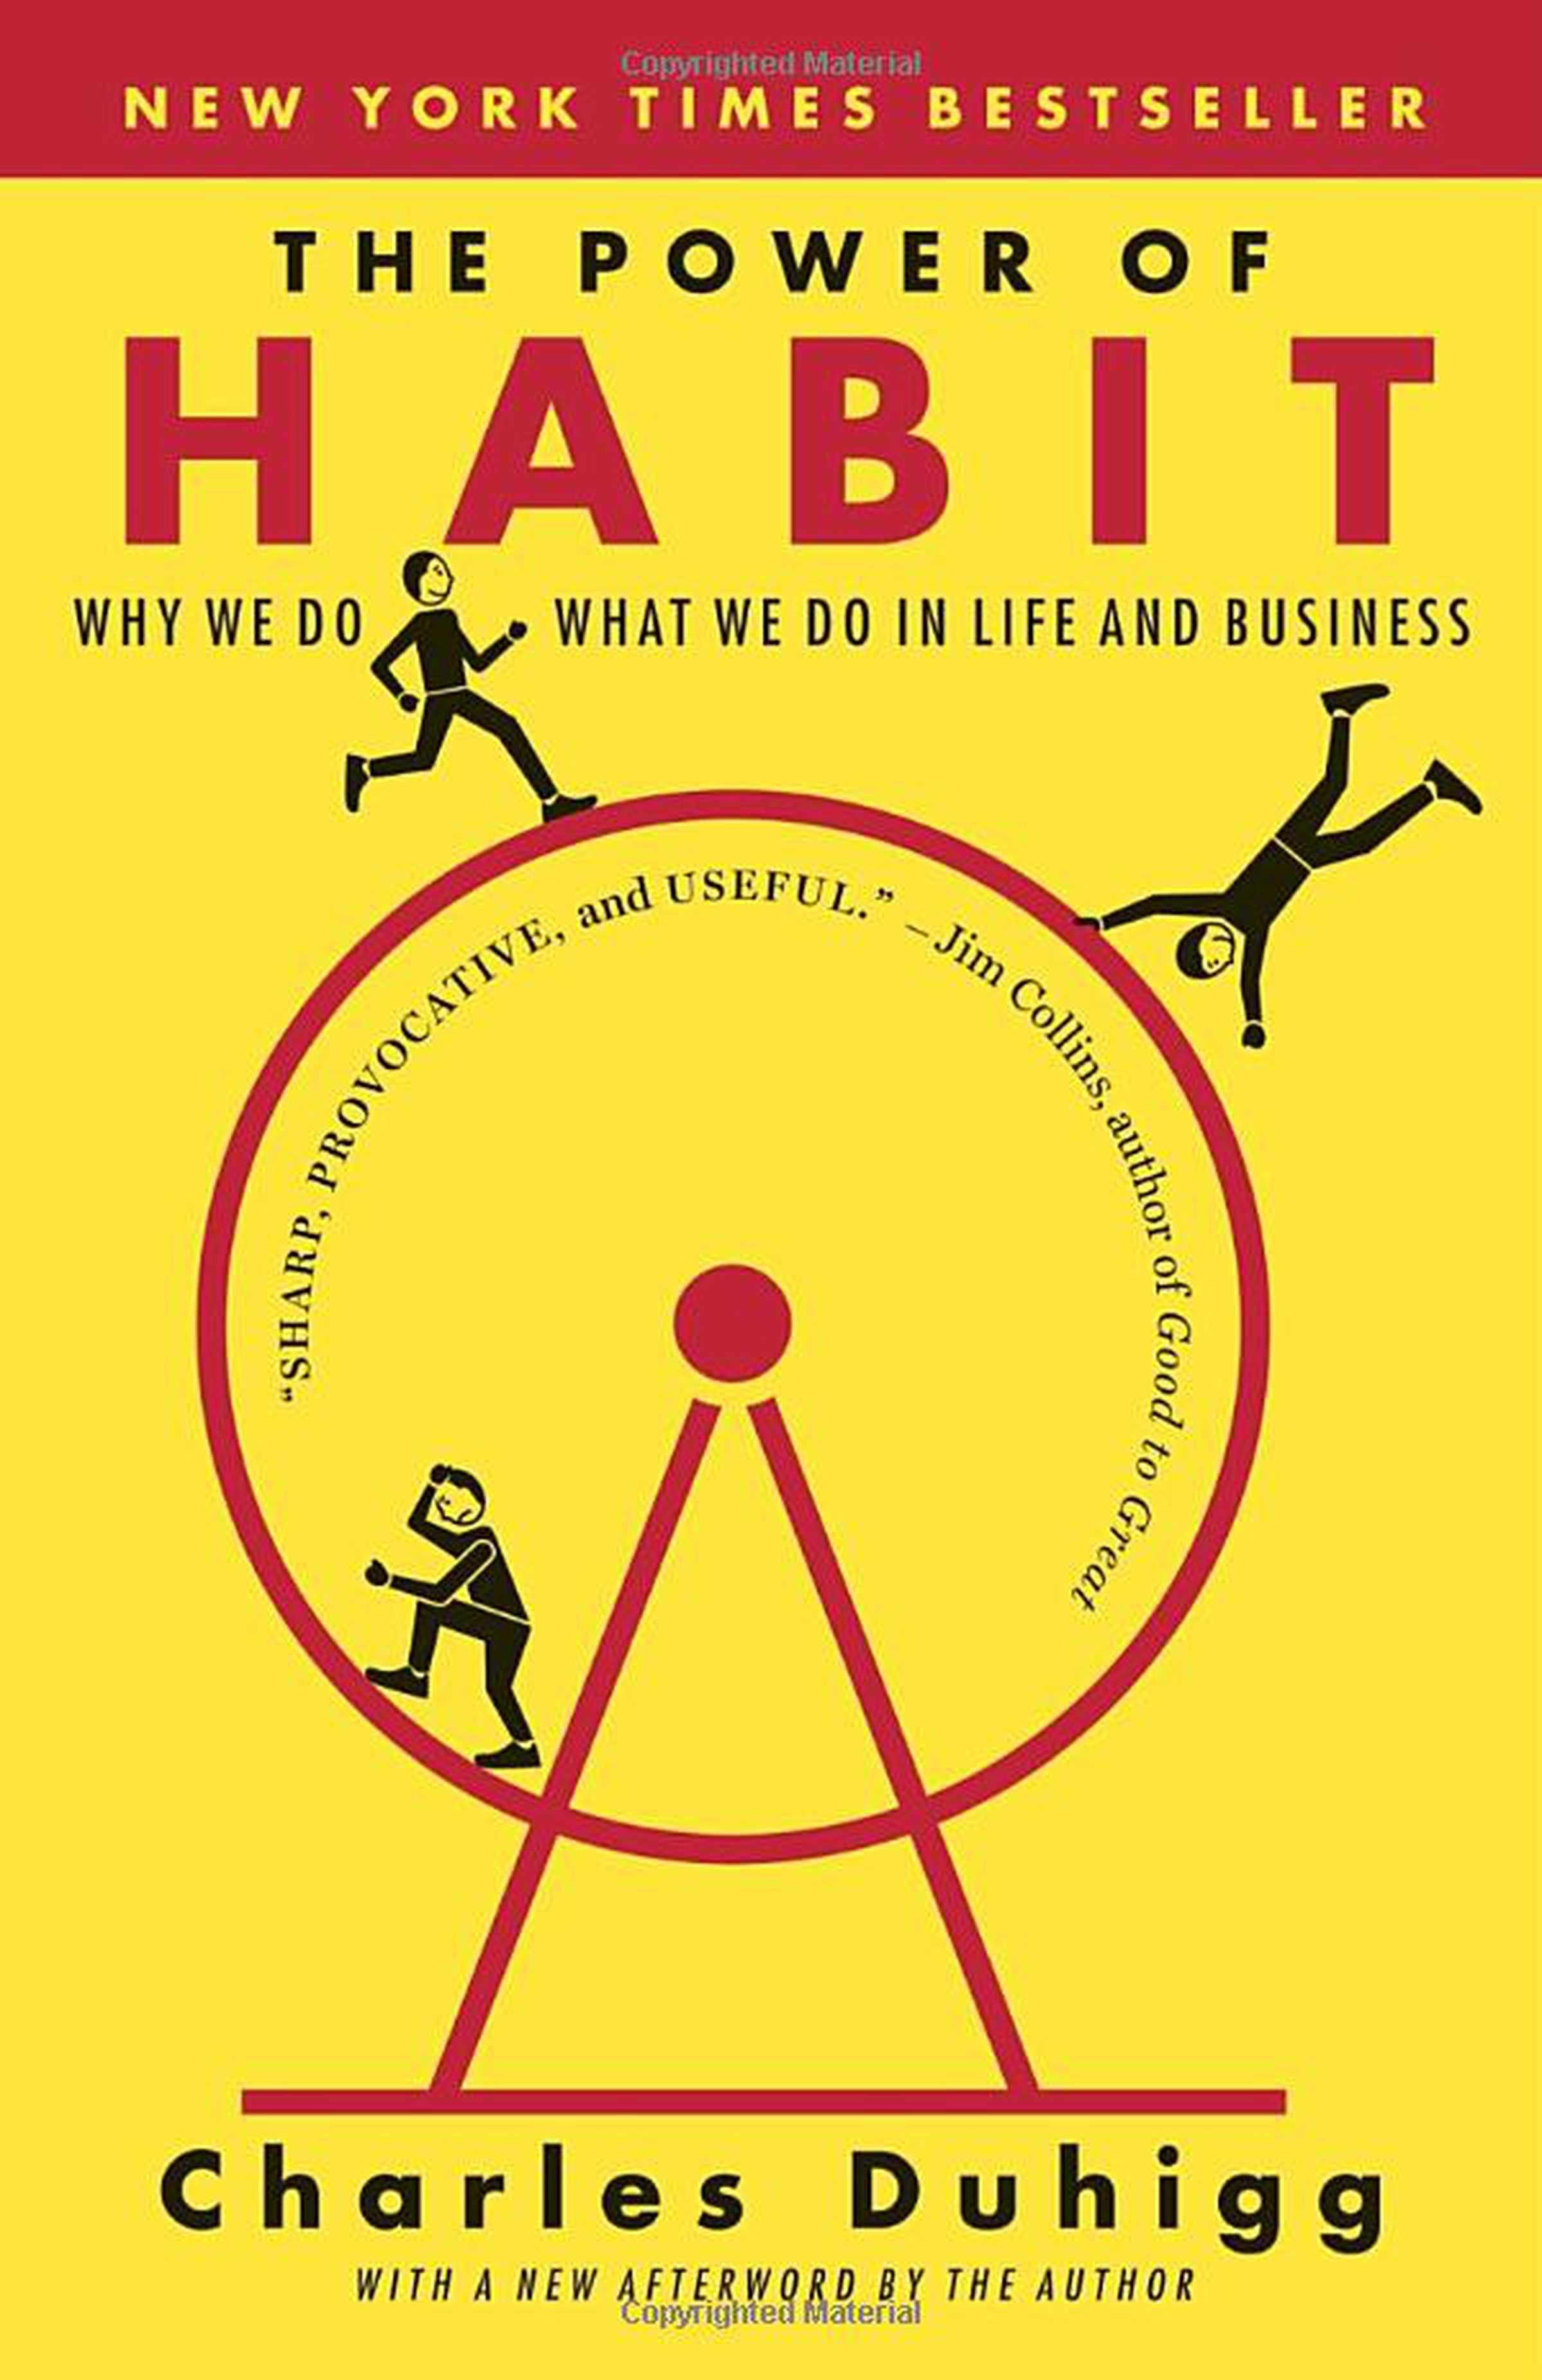 Book cover for The Power of Habit: a circle with three figures dancing around it against a yellow background